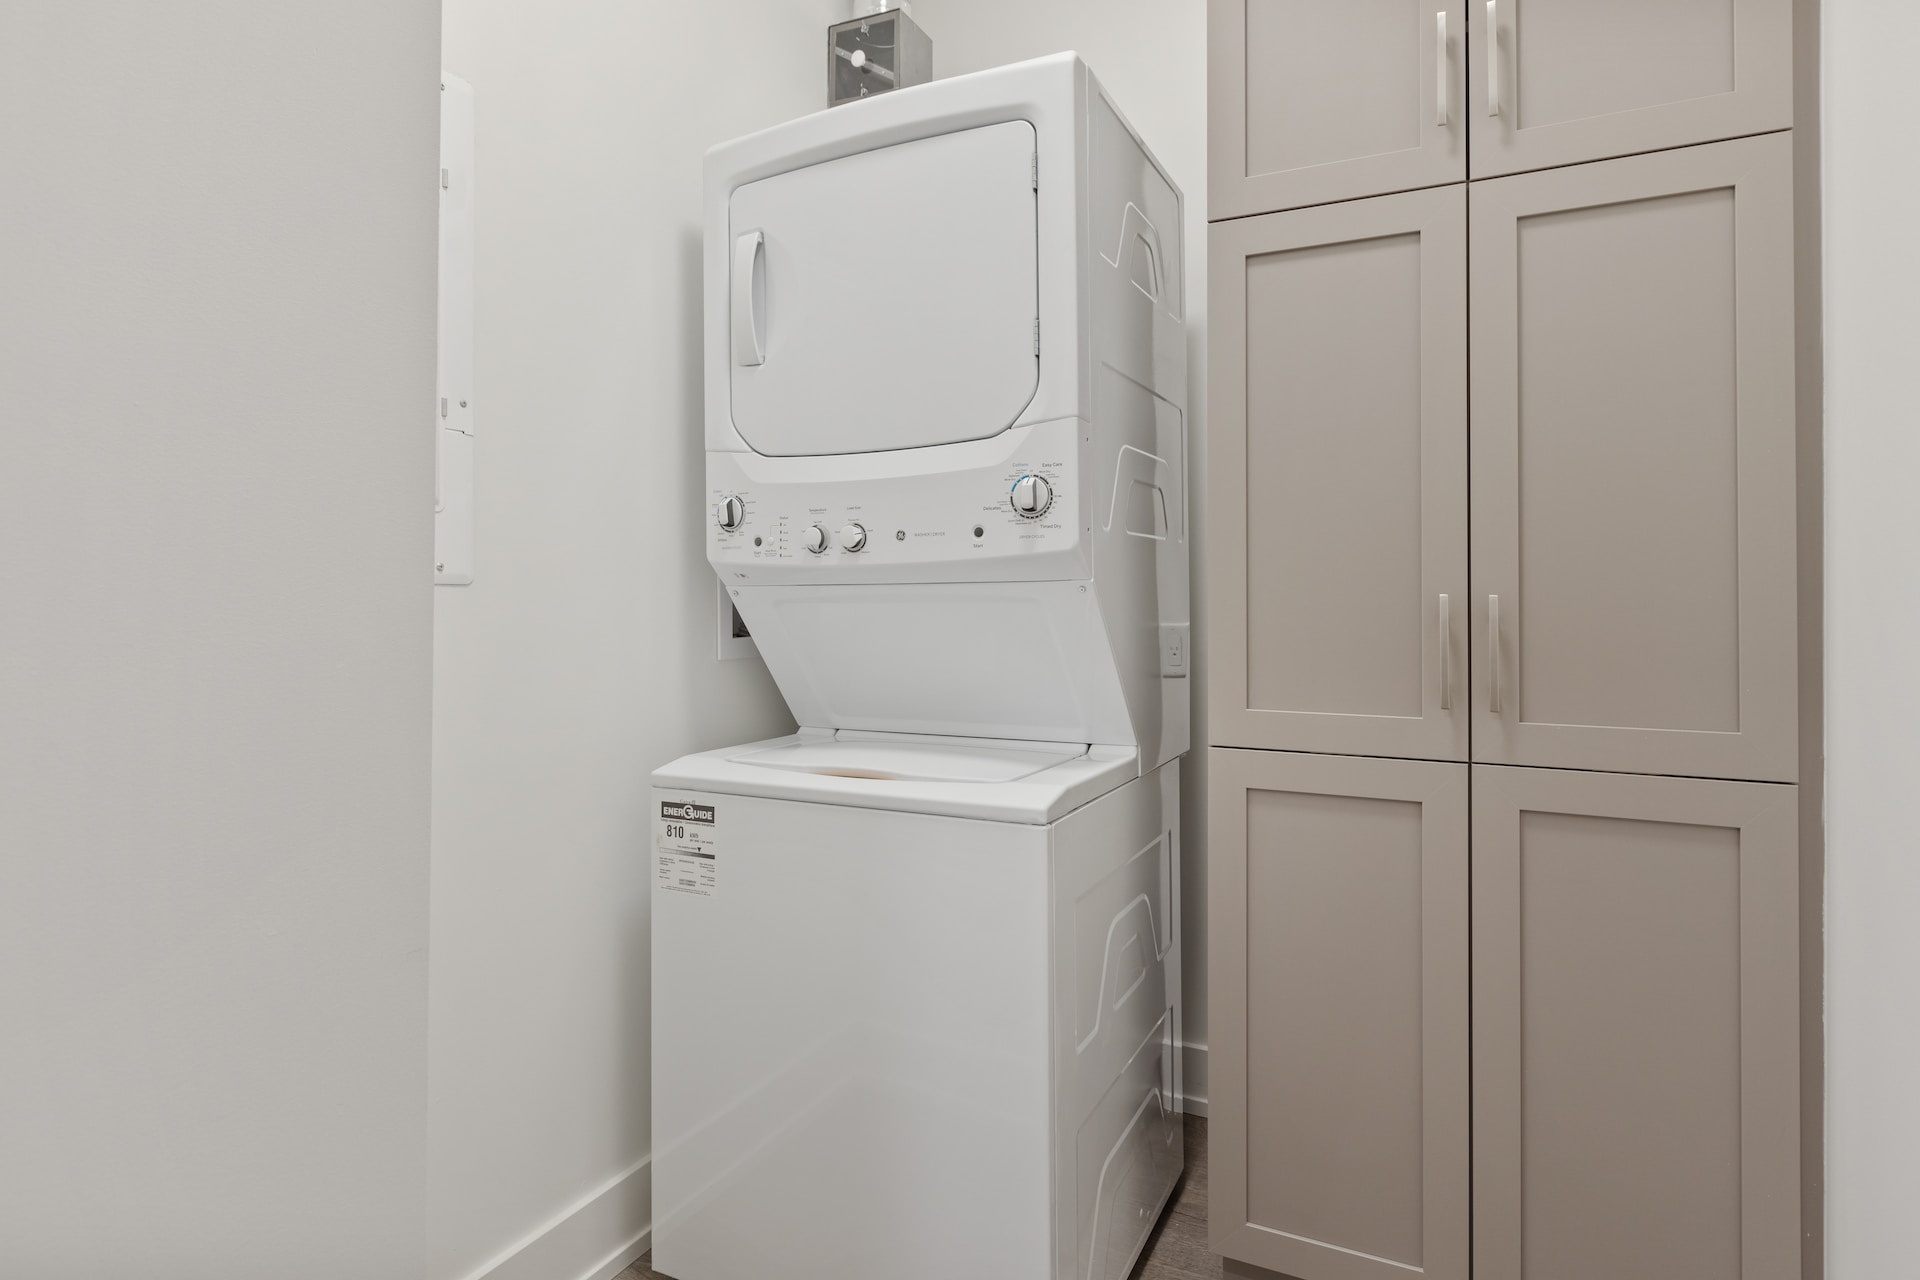 A Complete Guide to Deep Cleaning Your Dryer. Deep cleaning your dryer should be a regular part of your maintenance routine!